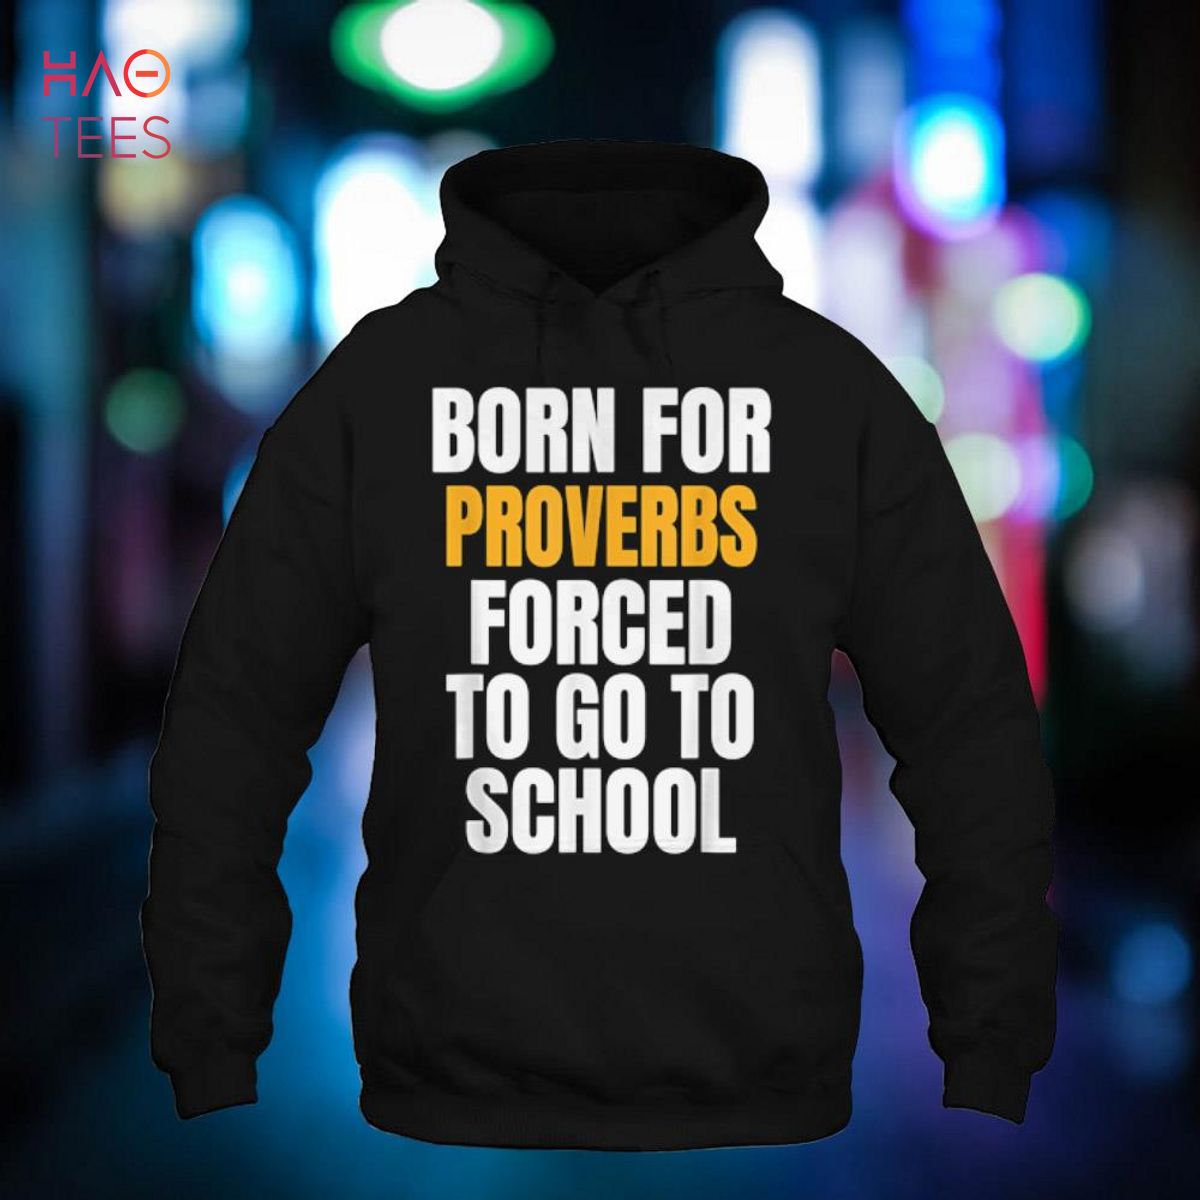 Born For Proverbs Funny Gift Shirt